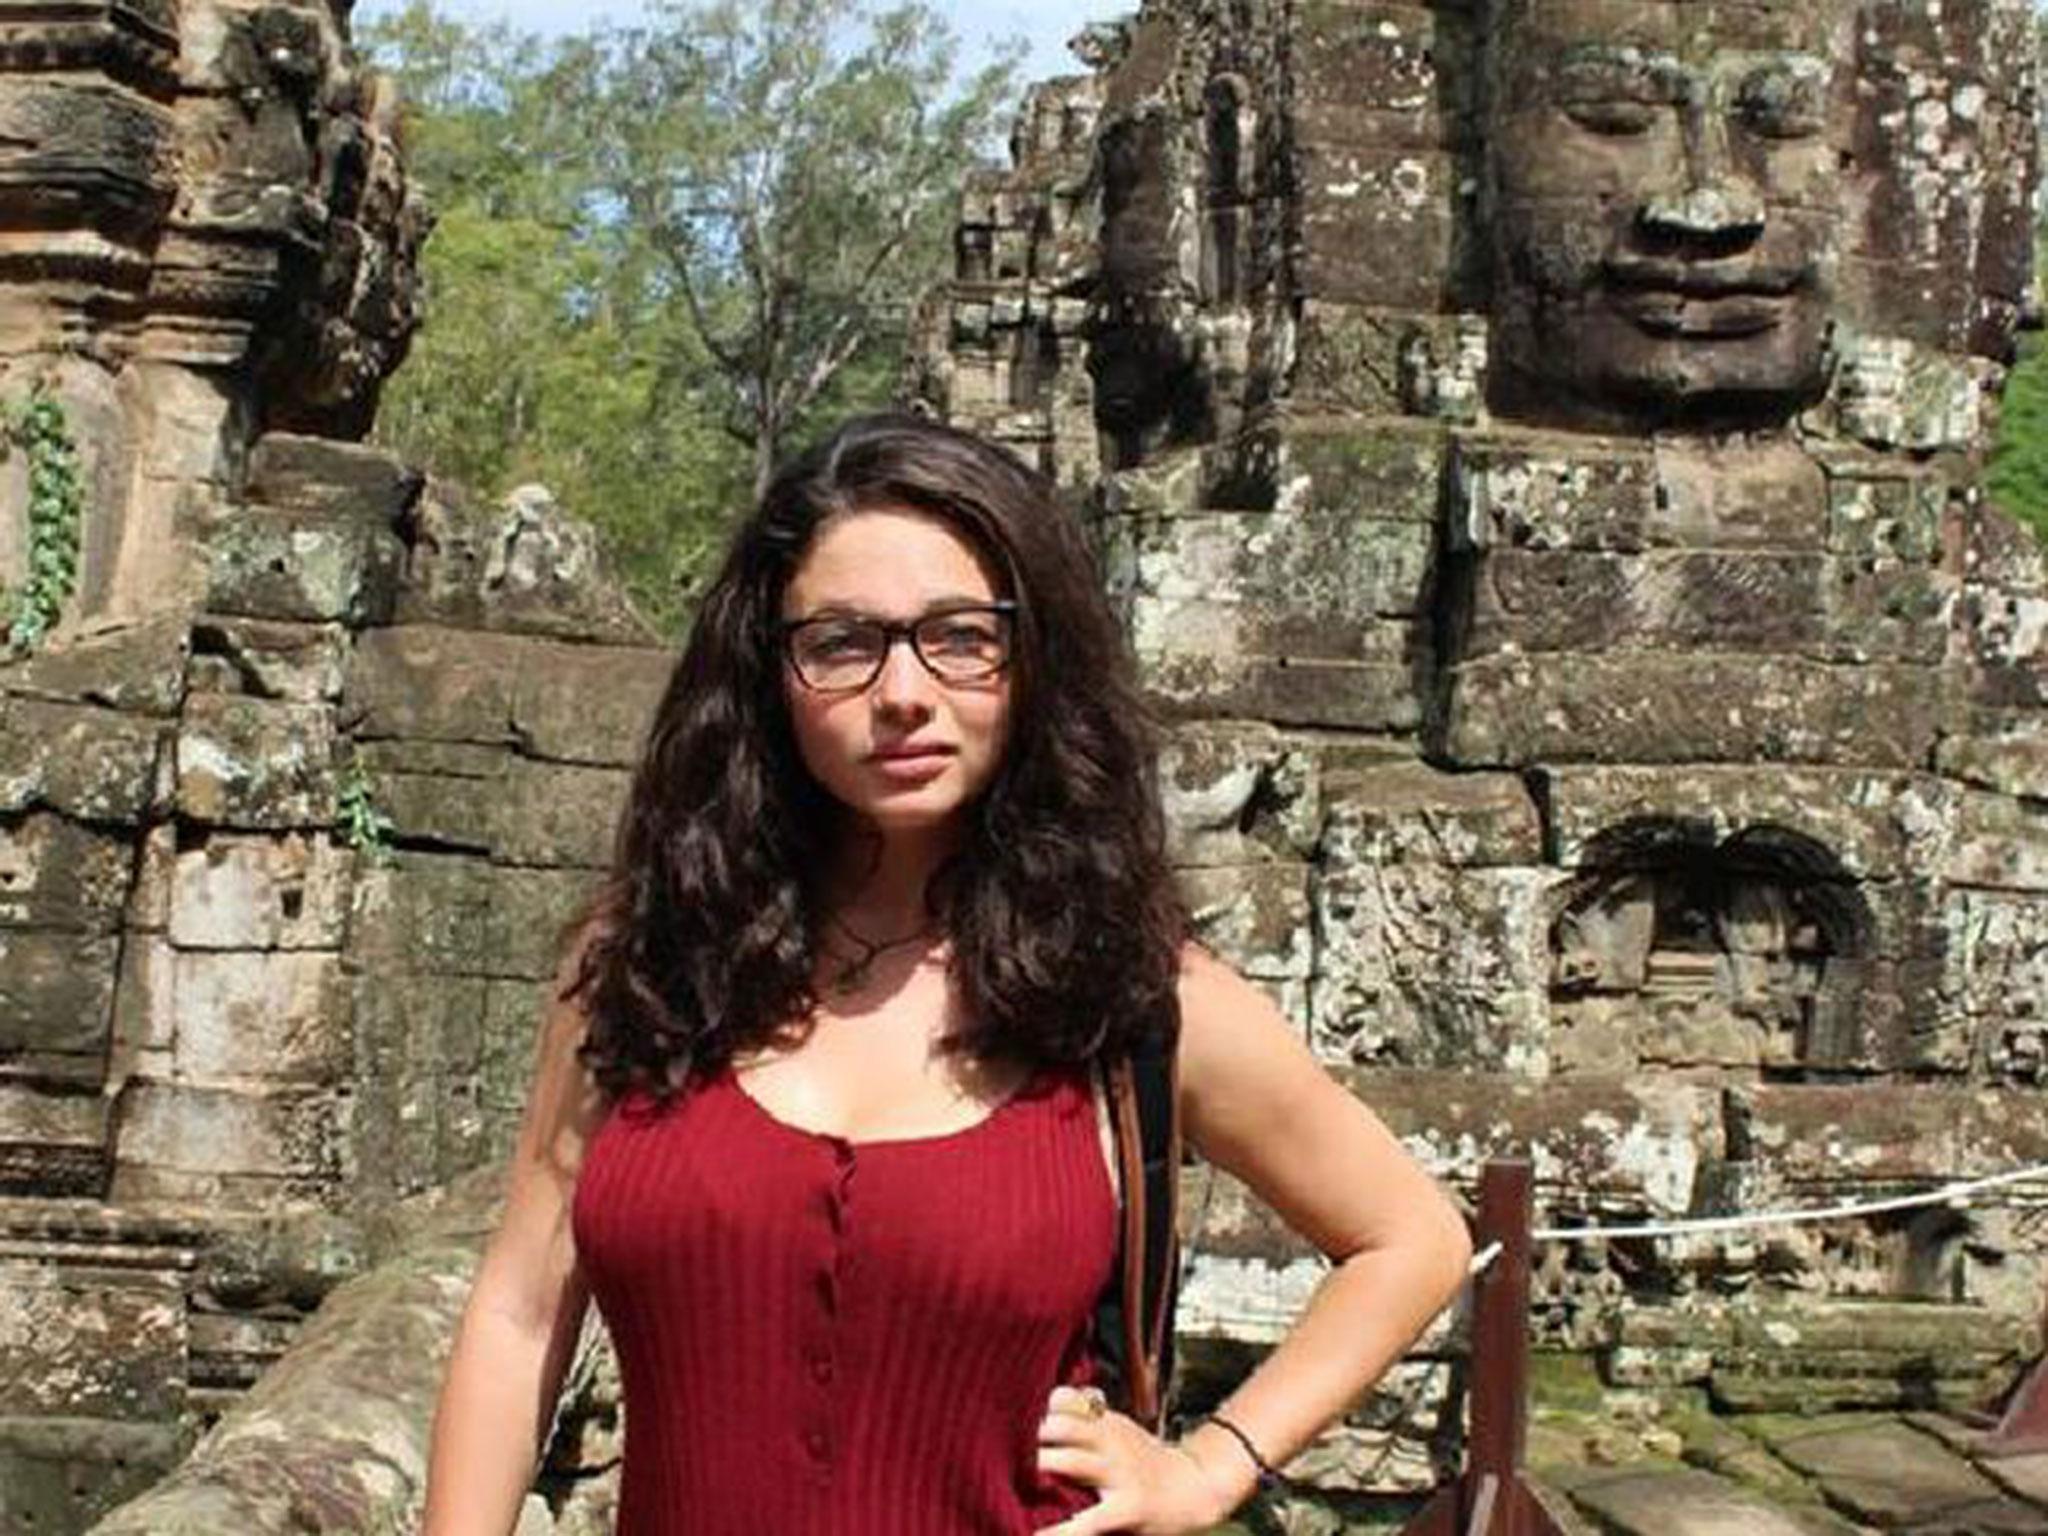 Hannah Gavios, pictured here in Cambodia